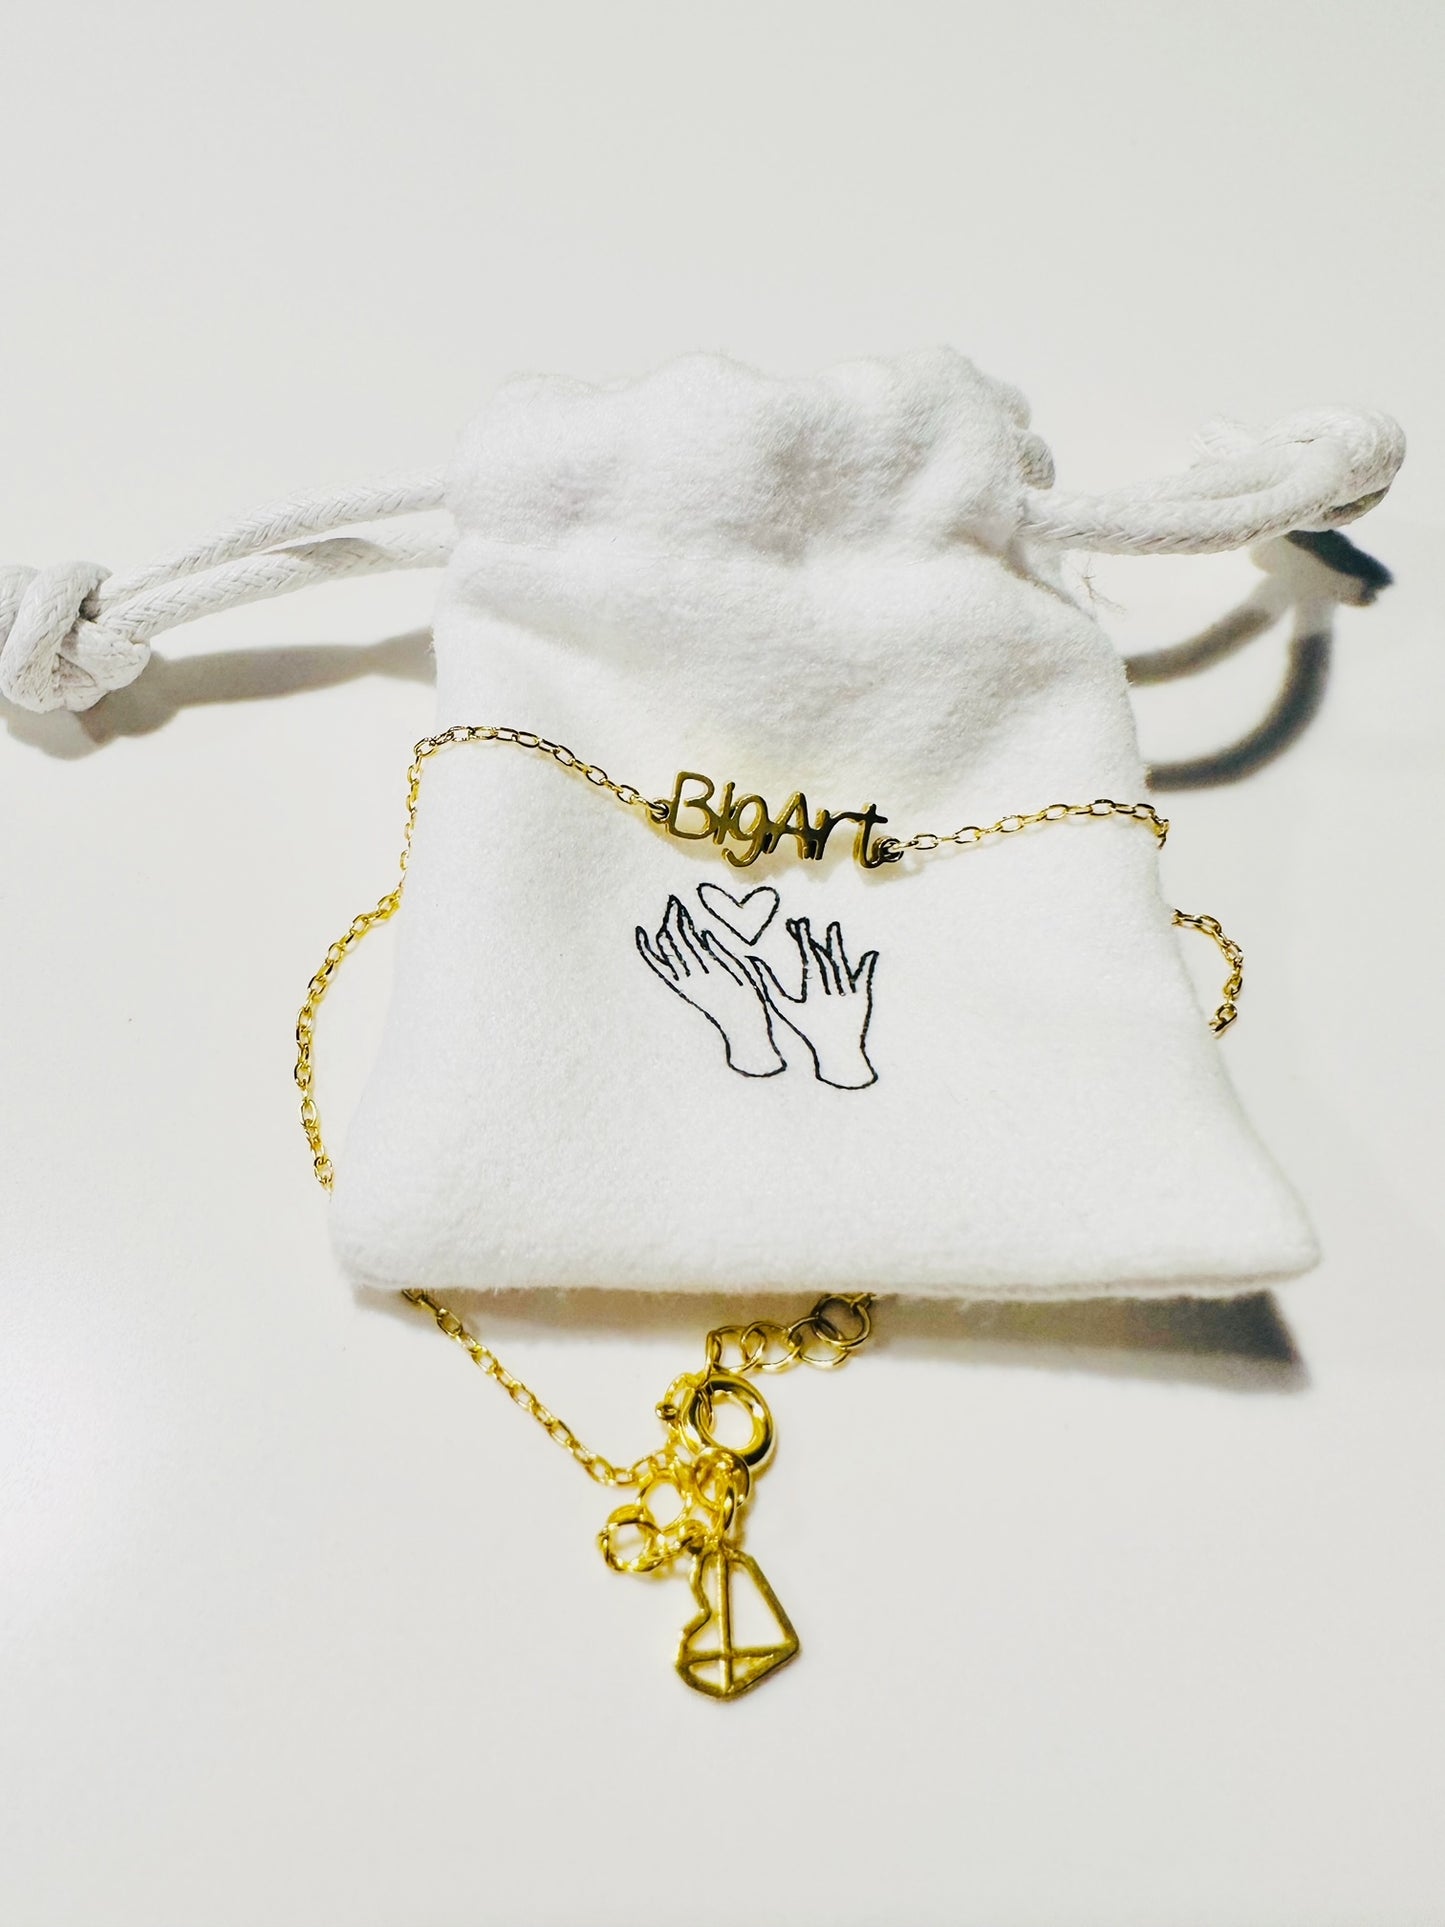 Delicate chain with a with a word charm reading ’BigArt’ with fabric bag packaging 

